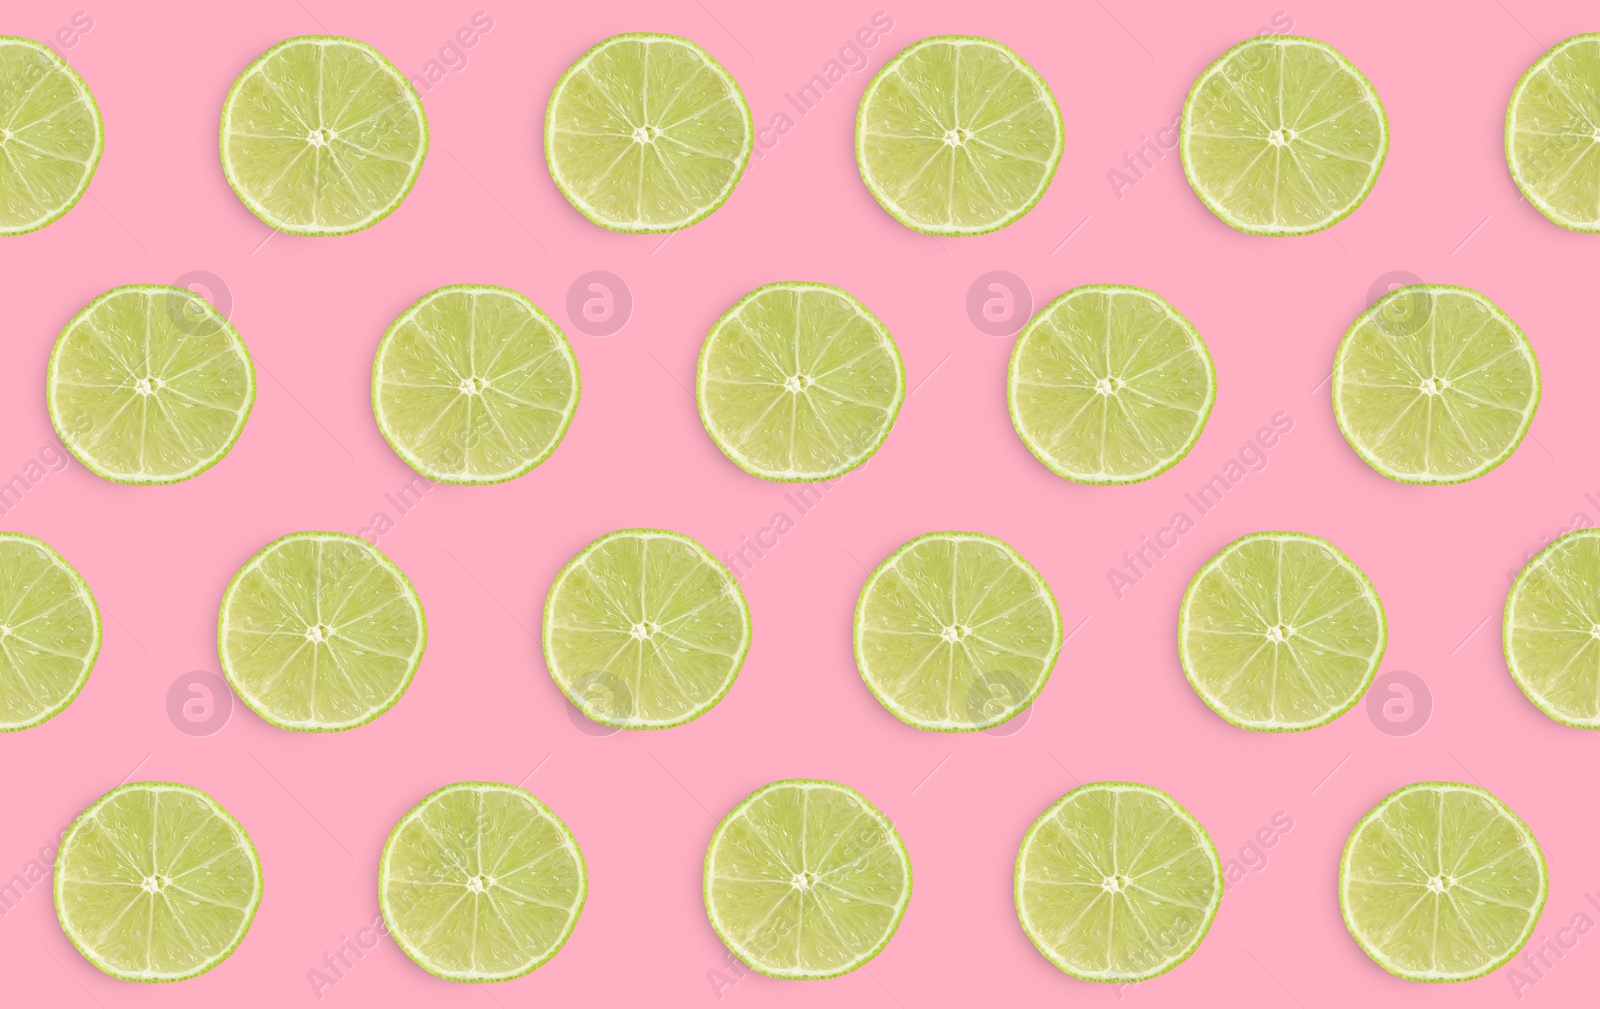 Image of Slices of limes on pink background, flat lay